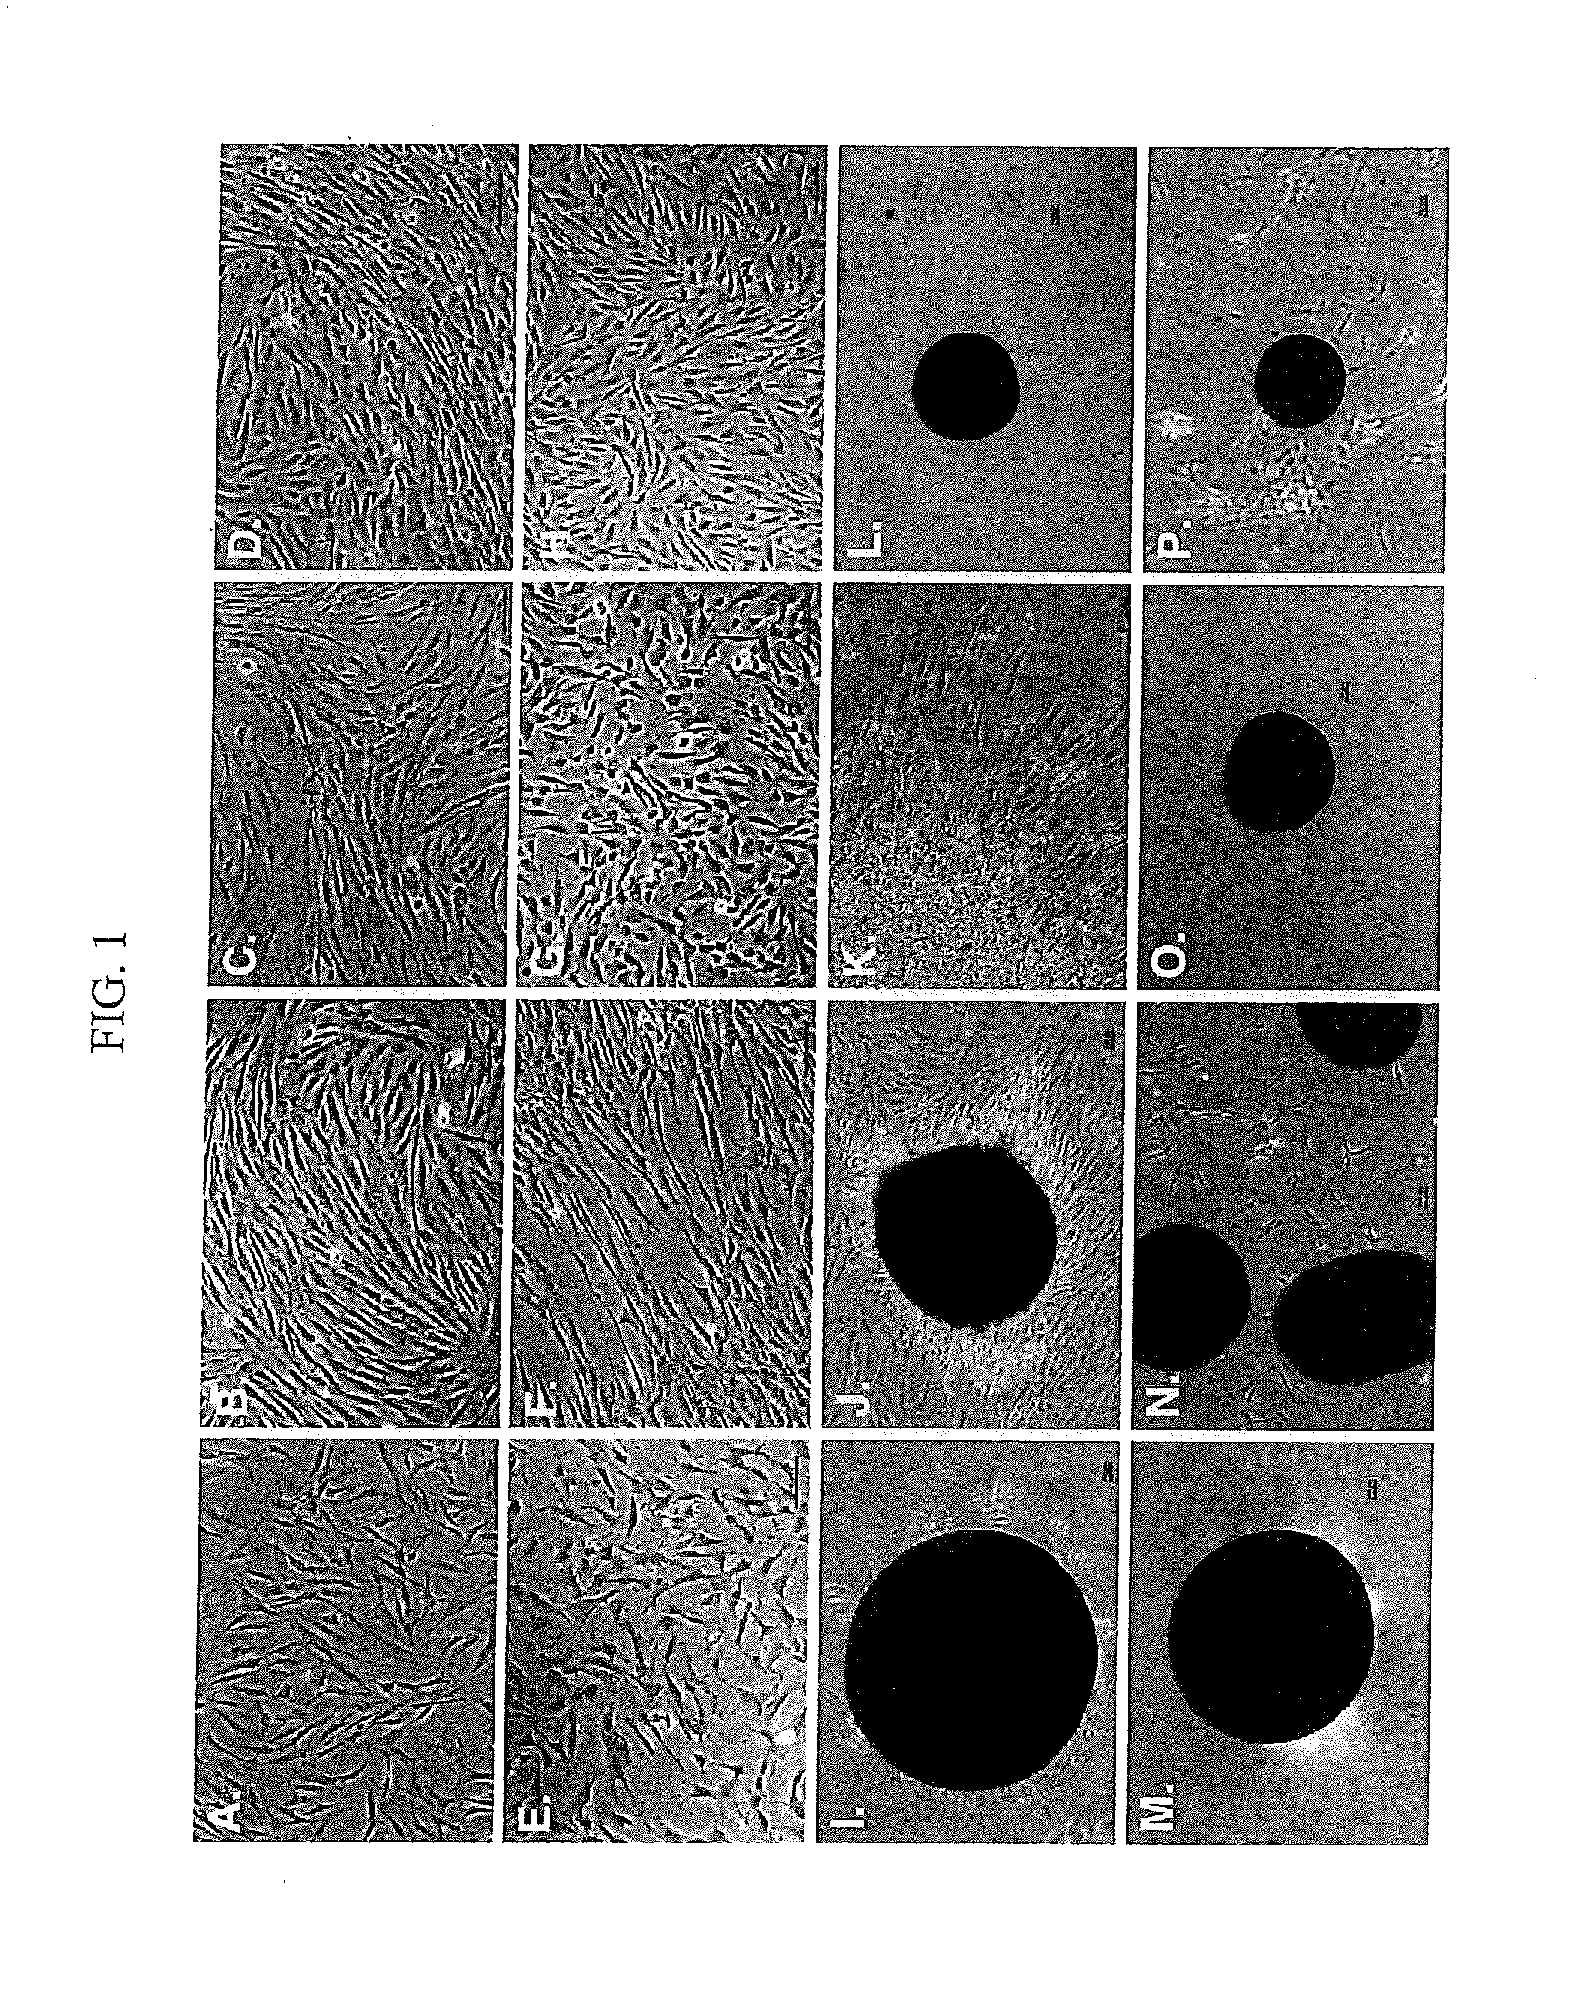 Differentiated Progeny of Clonal Progenitor Cell Lines